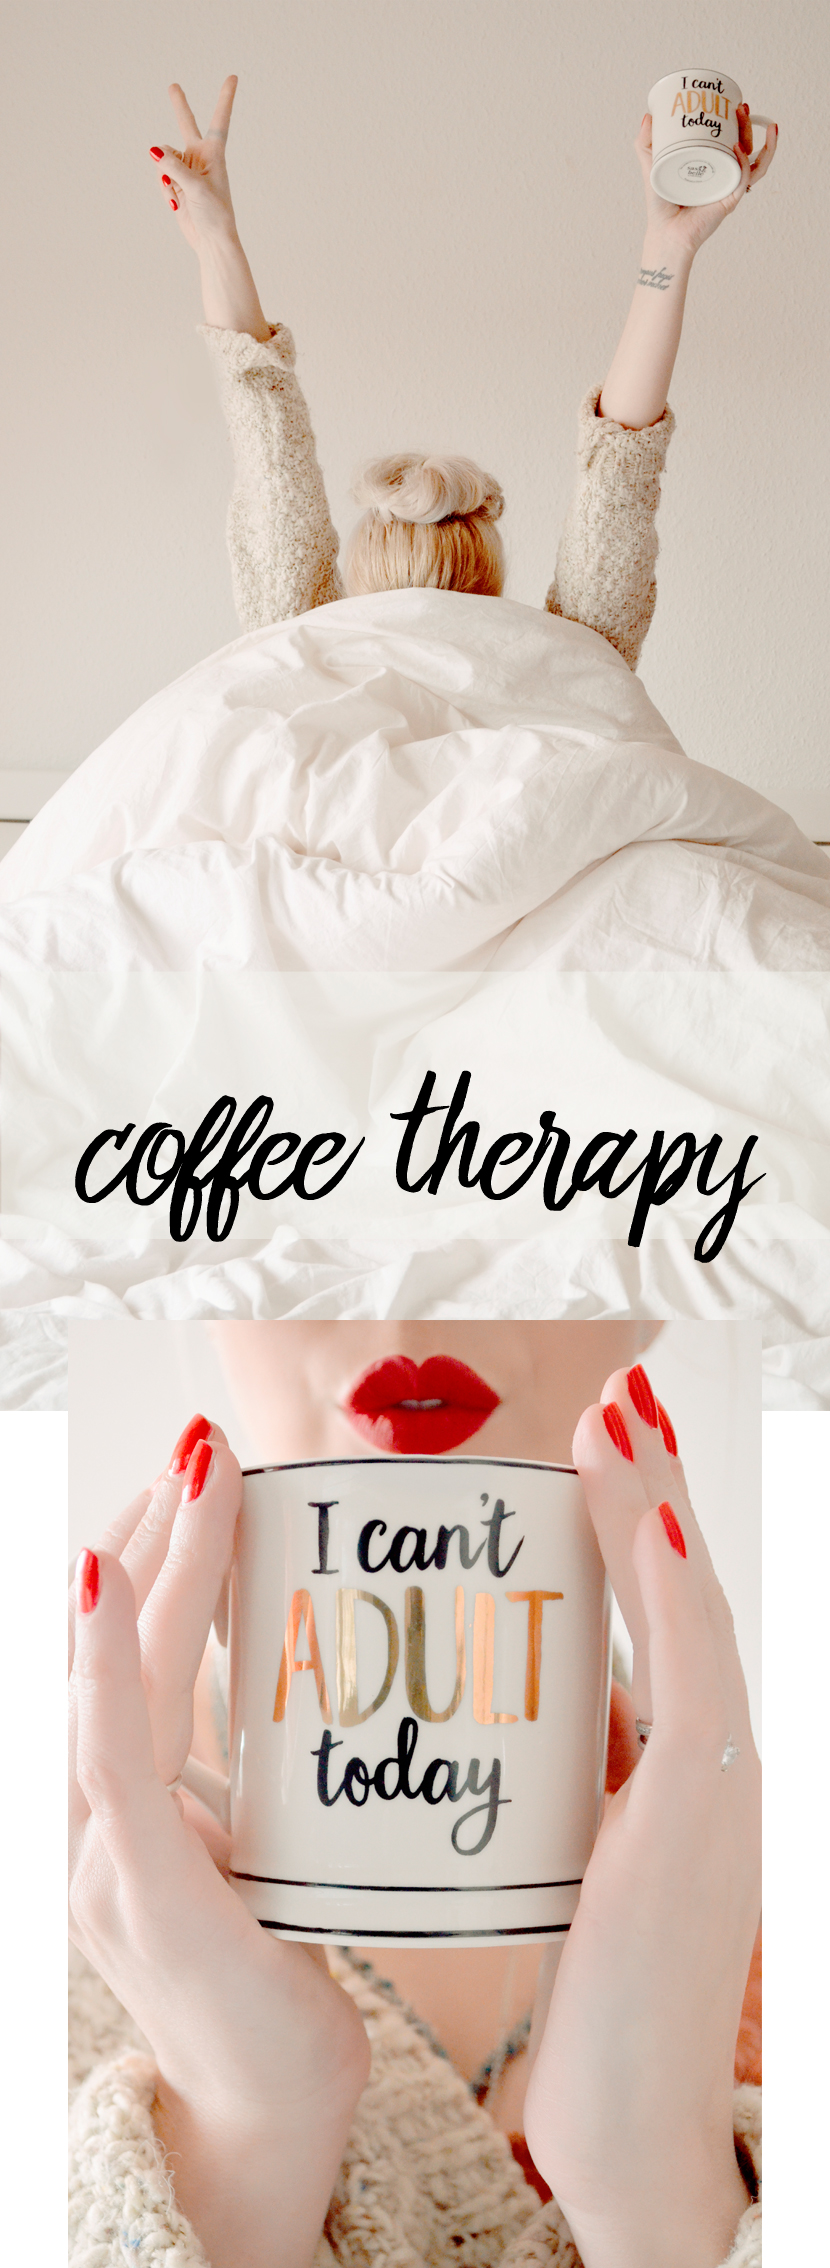 I-cannot-adult-today-coffee-therapy-Blog-Belle-Melange-2